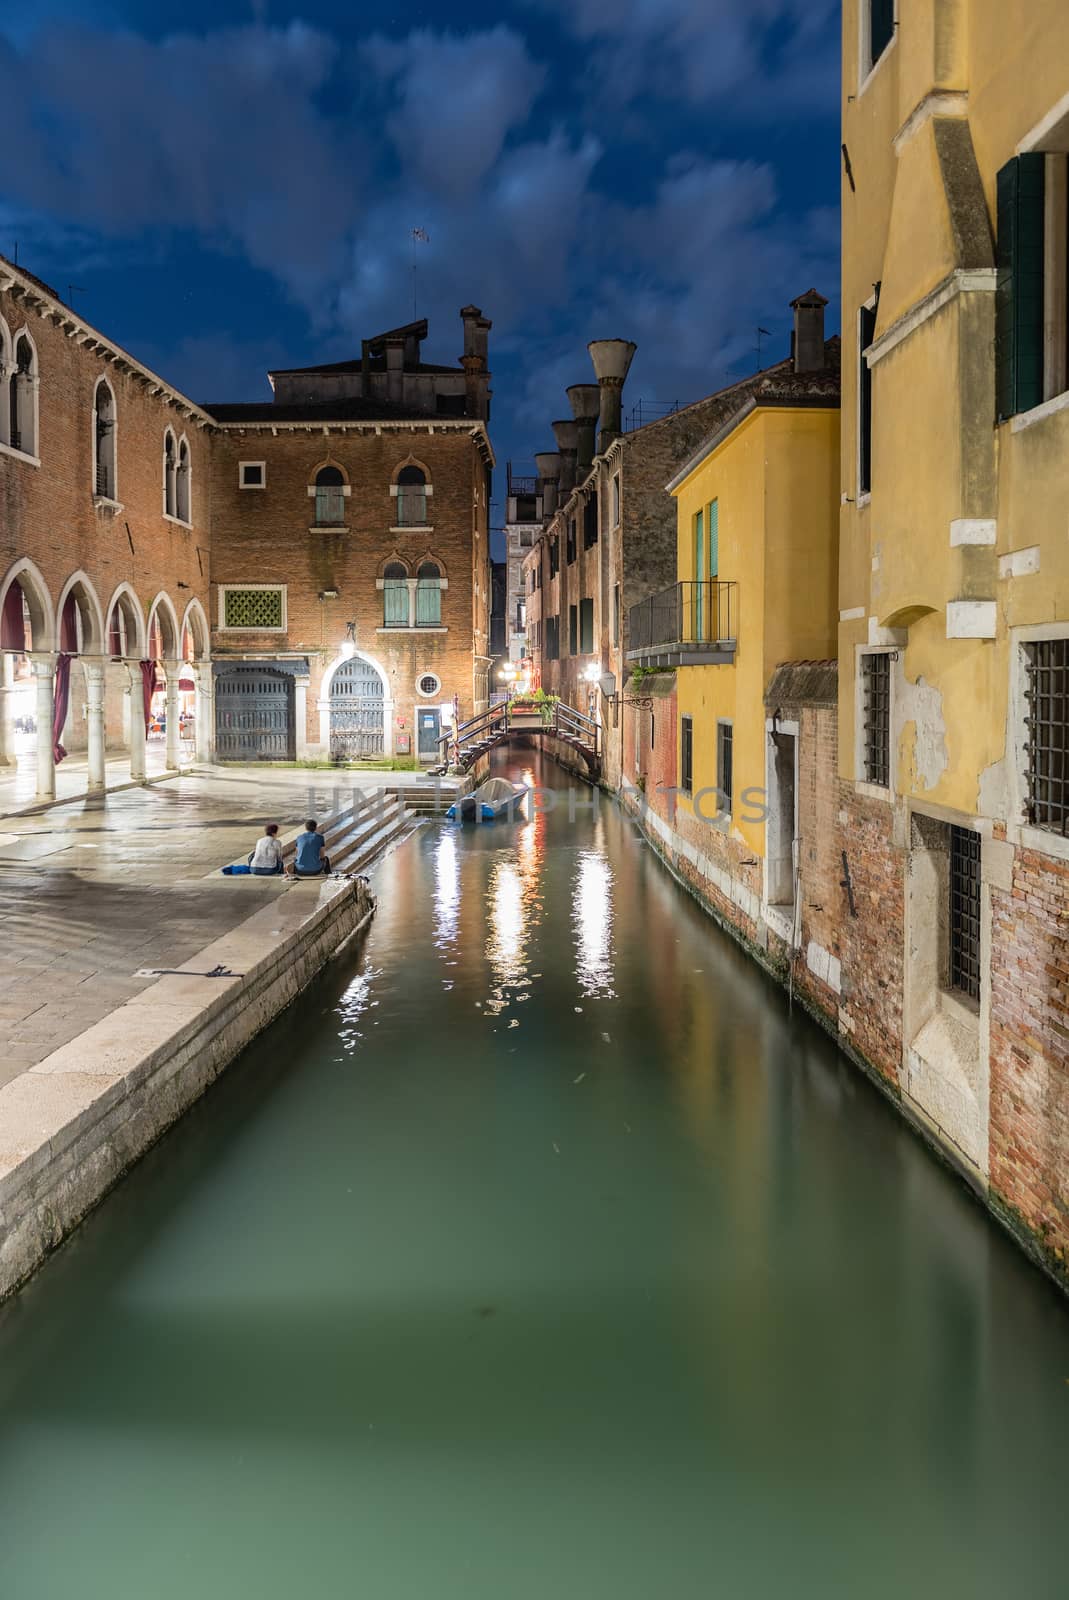 View over a picturesque canal and little bridge, Venice, Italy by marcorubino